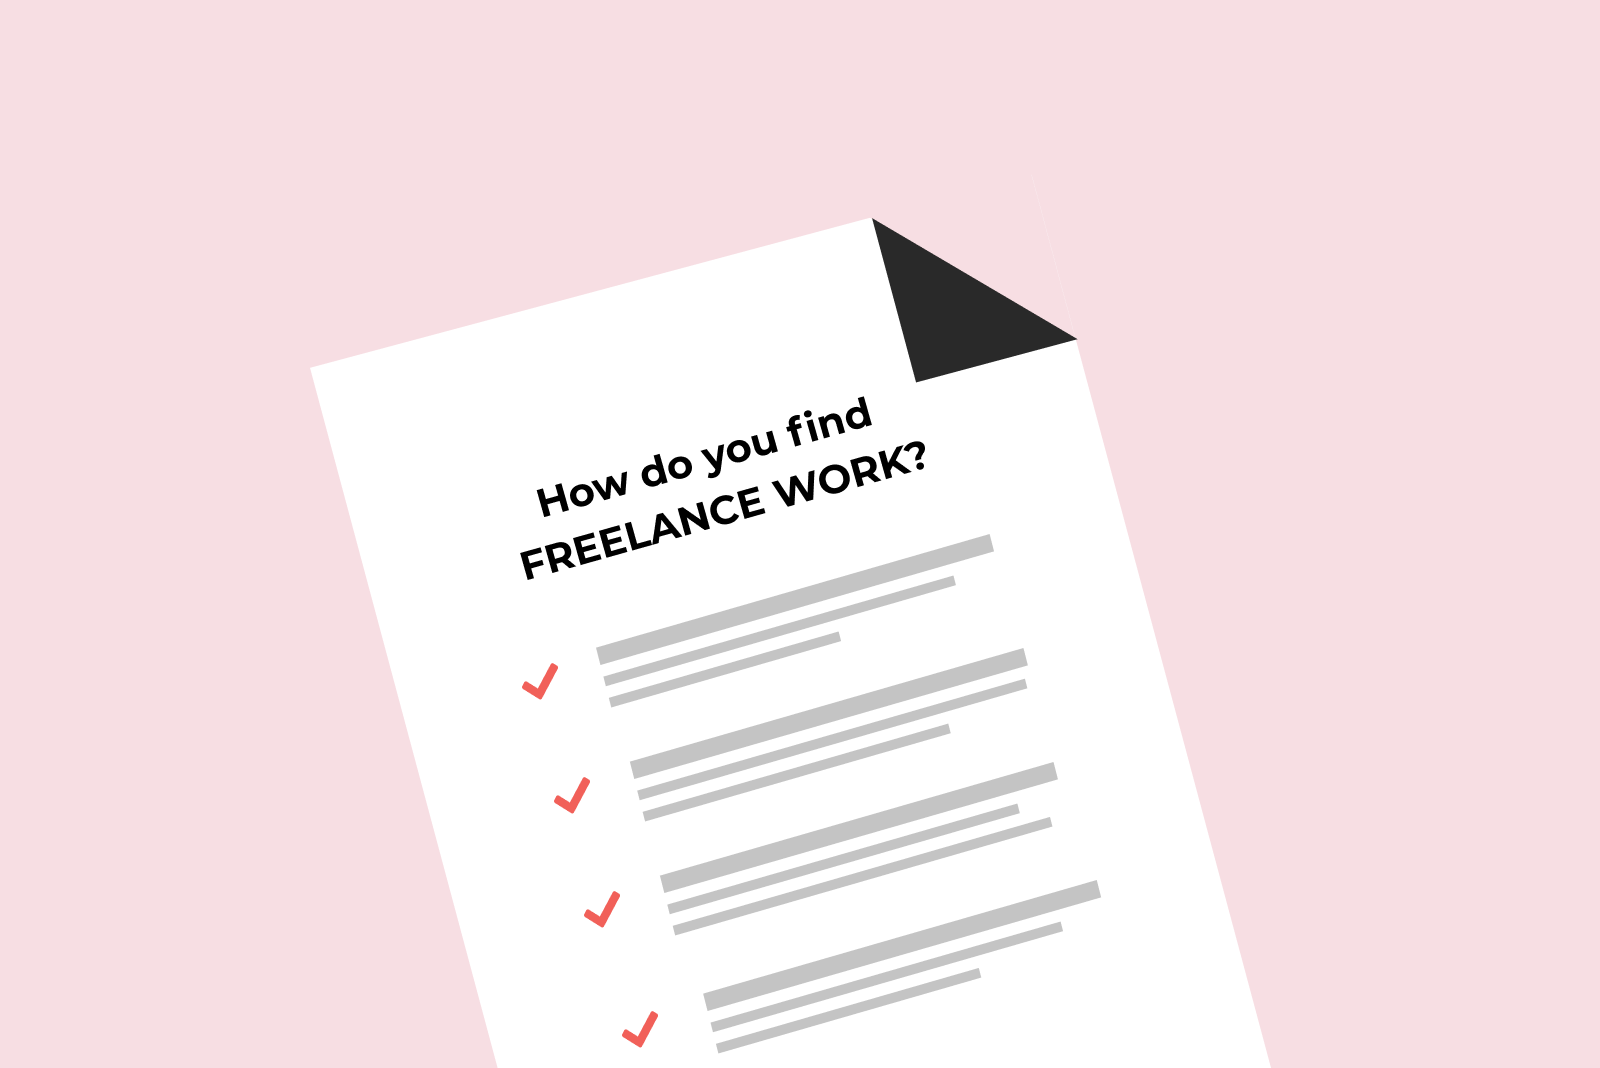 Paper with "how do you find freelance work?" and checkmarks on a pink background